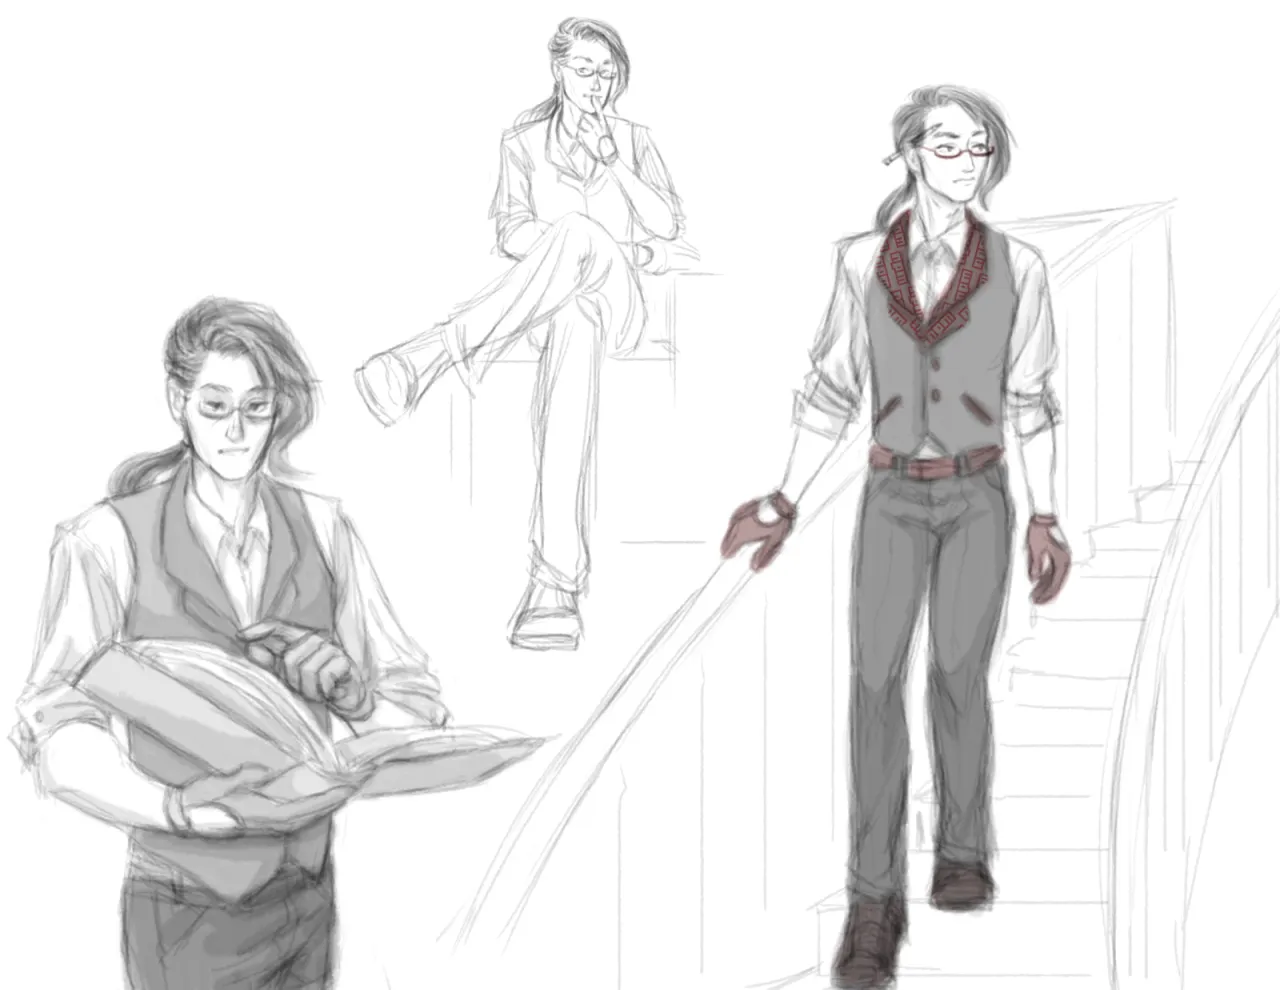 Sketches of the unreleased FujoGuide character [Redacted]. He has a thin build, a light skin tone, and long hair swept to one side and gathered in a ponytail. He is neatly dressed in a button down shirt, collared vest, dress pants, driving gloves, and oval bottom rim glasses. On the left, he is holding and reading a large book. In the middle, he is sitting cross-legged and looking thoughtful with a finger on his lips. On the right, he is walking down a grand staircase with one hand on the railing and a pencil behind his ear.